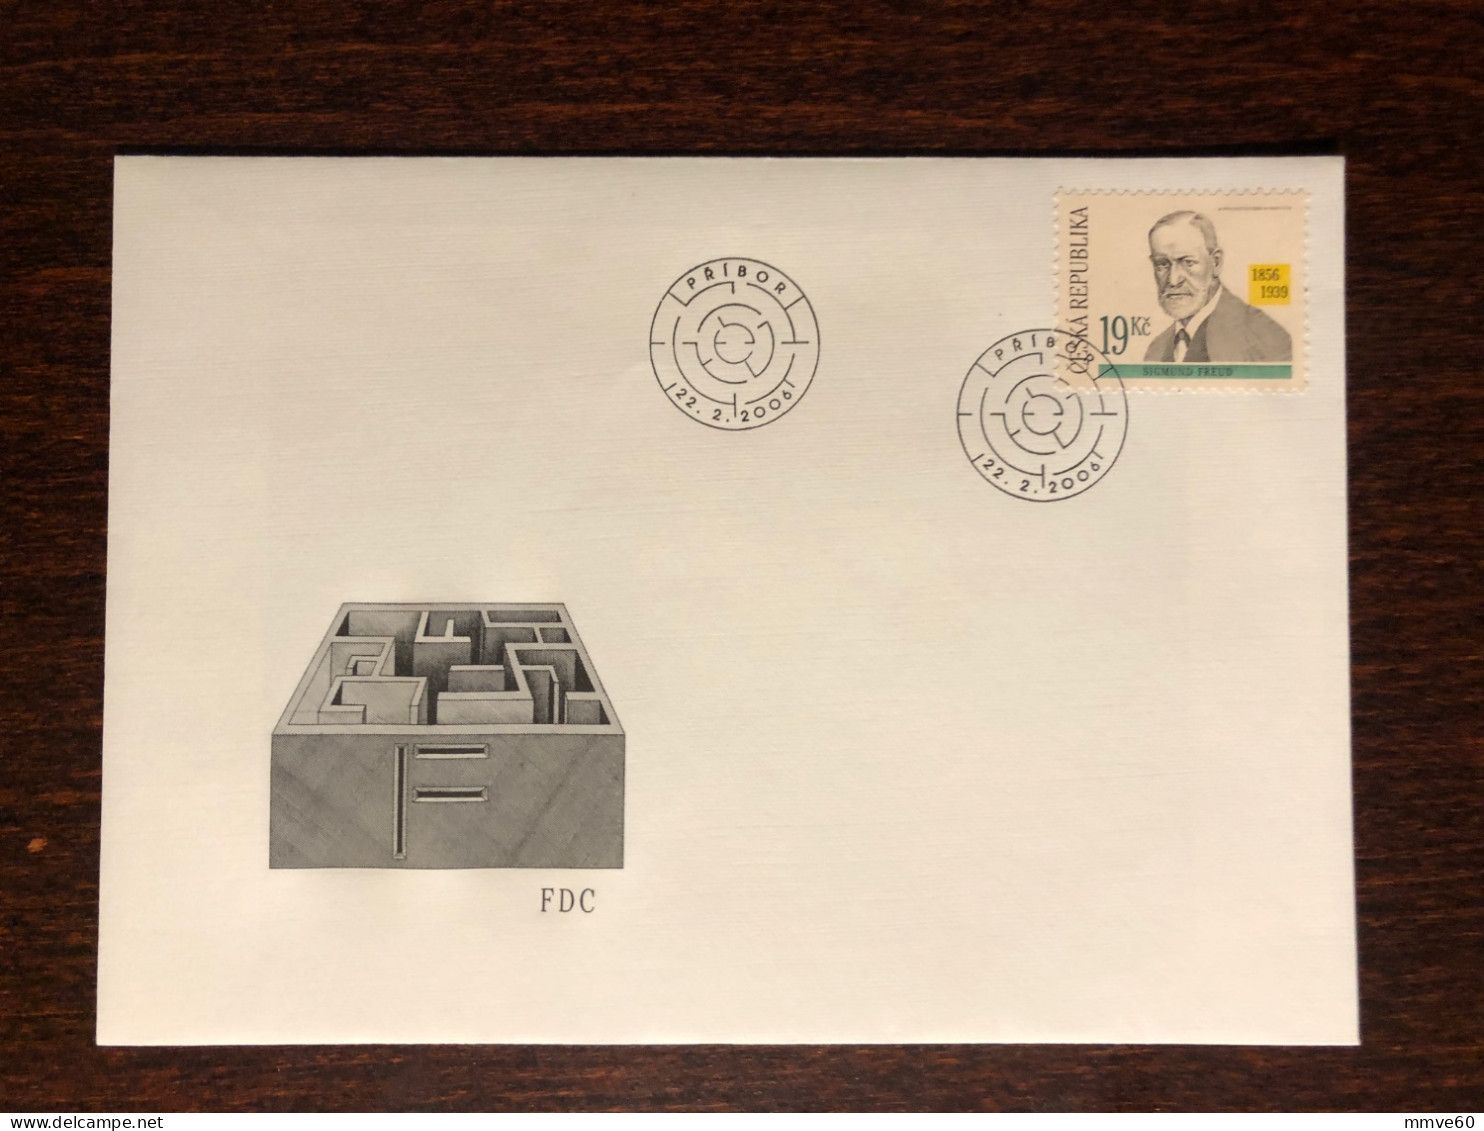 CZECH FDC COVER 2006 YEAR FREUD PSYCHOANALYSE PSYCHIATRY HEALTH MEDICINE STAMPS - FDC